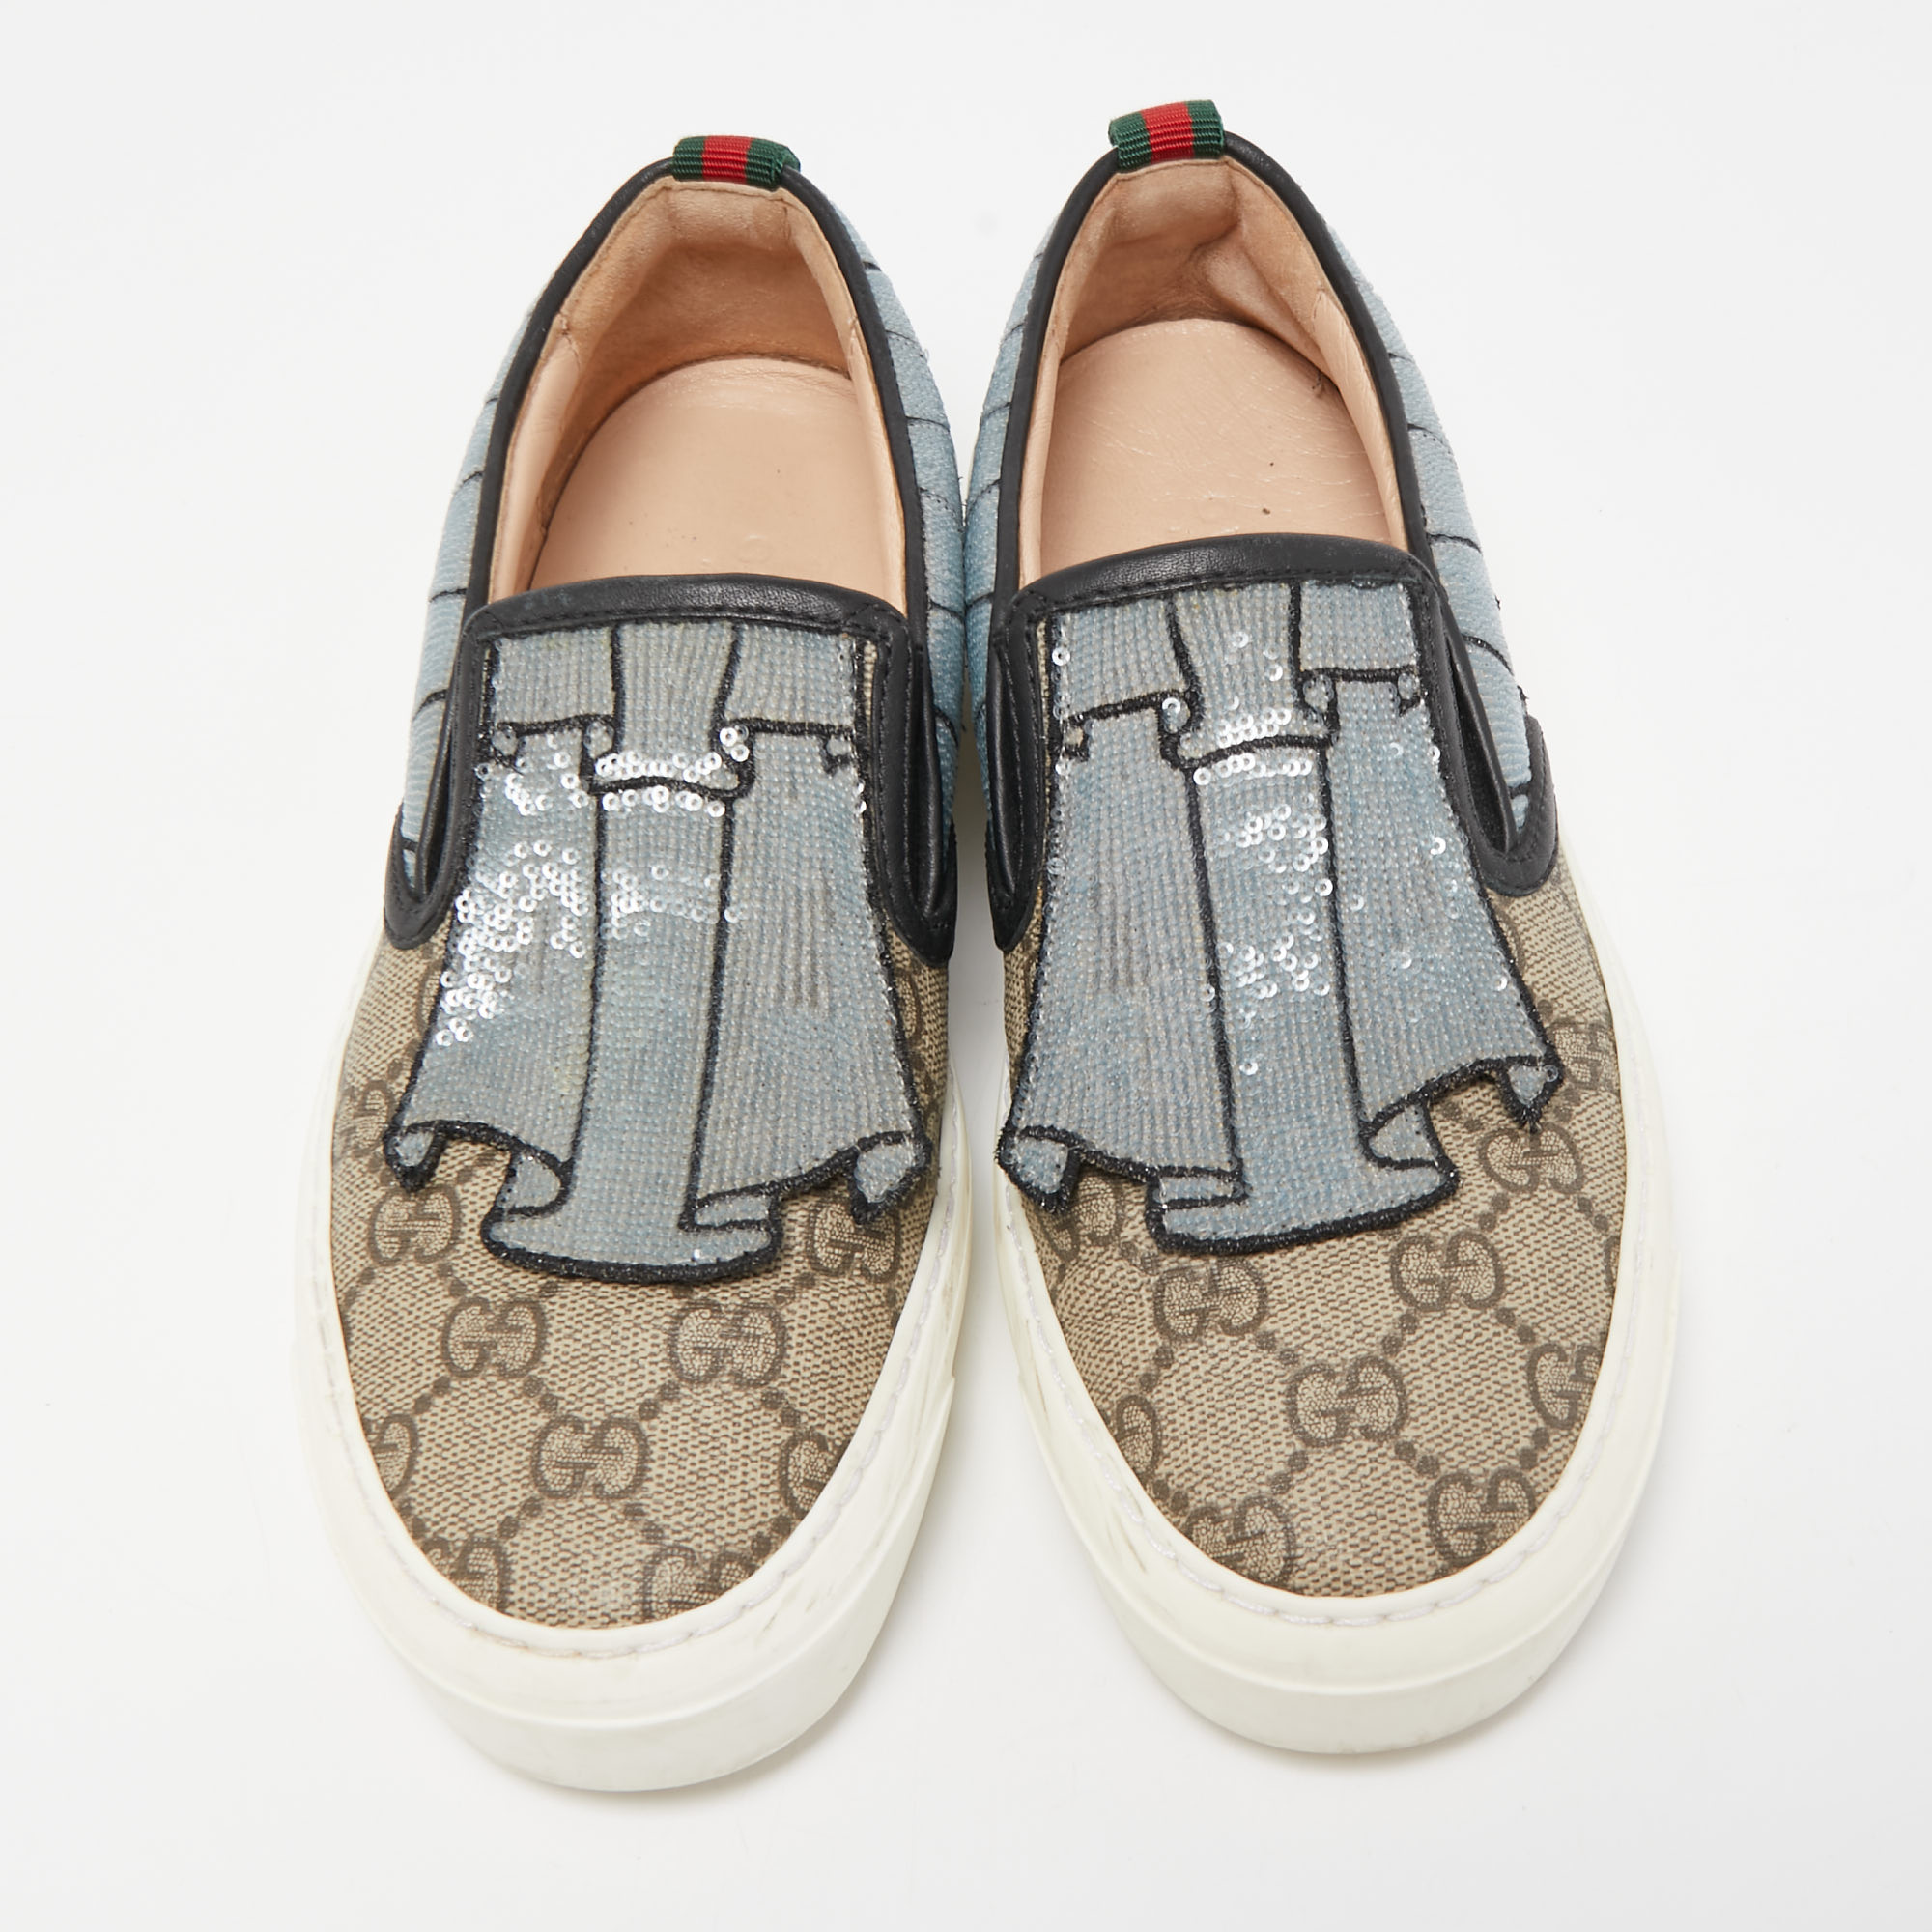 Gucci Tricolor GG Supreme Canvas And Sequins Slip On Sneakers Size 35